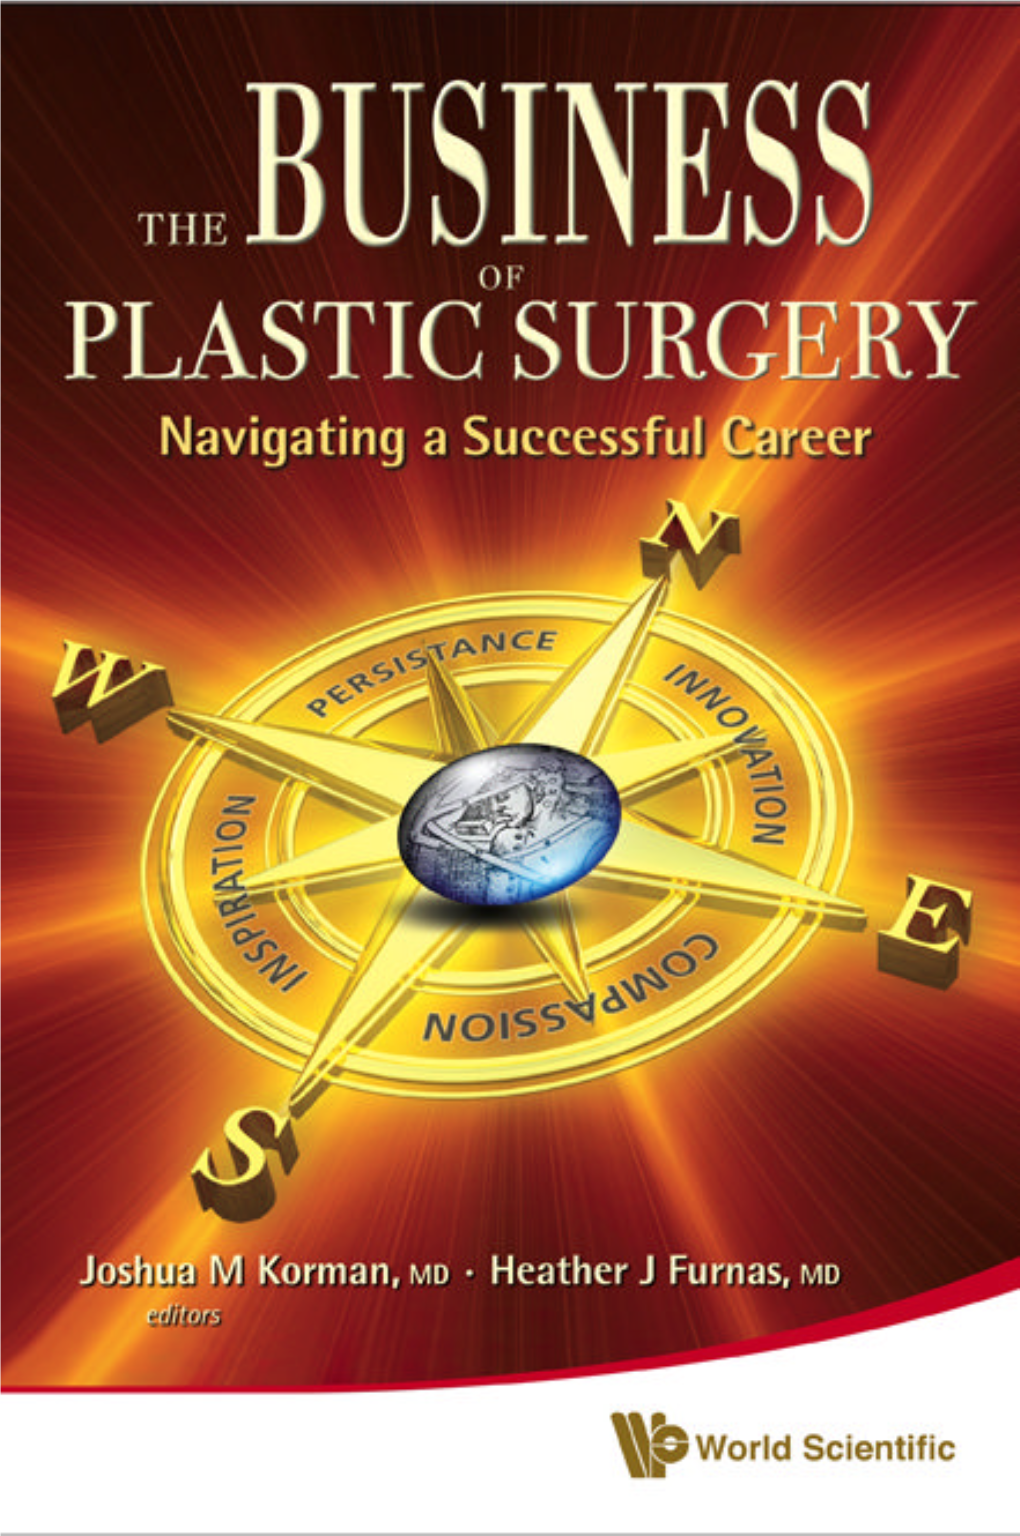 BUSINESS of PLASTIC SURGERY Navigating a Successful Career Copyright © 2010 by World Scientific Publishing Co